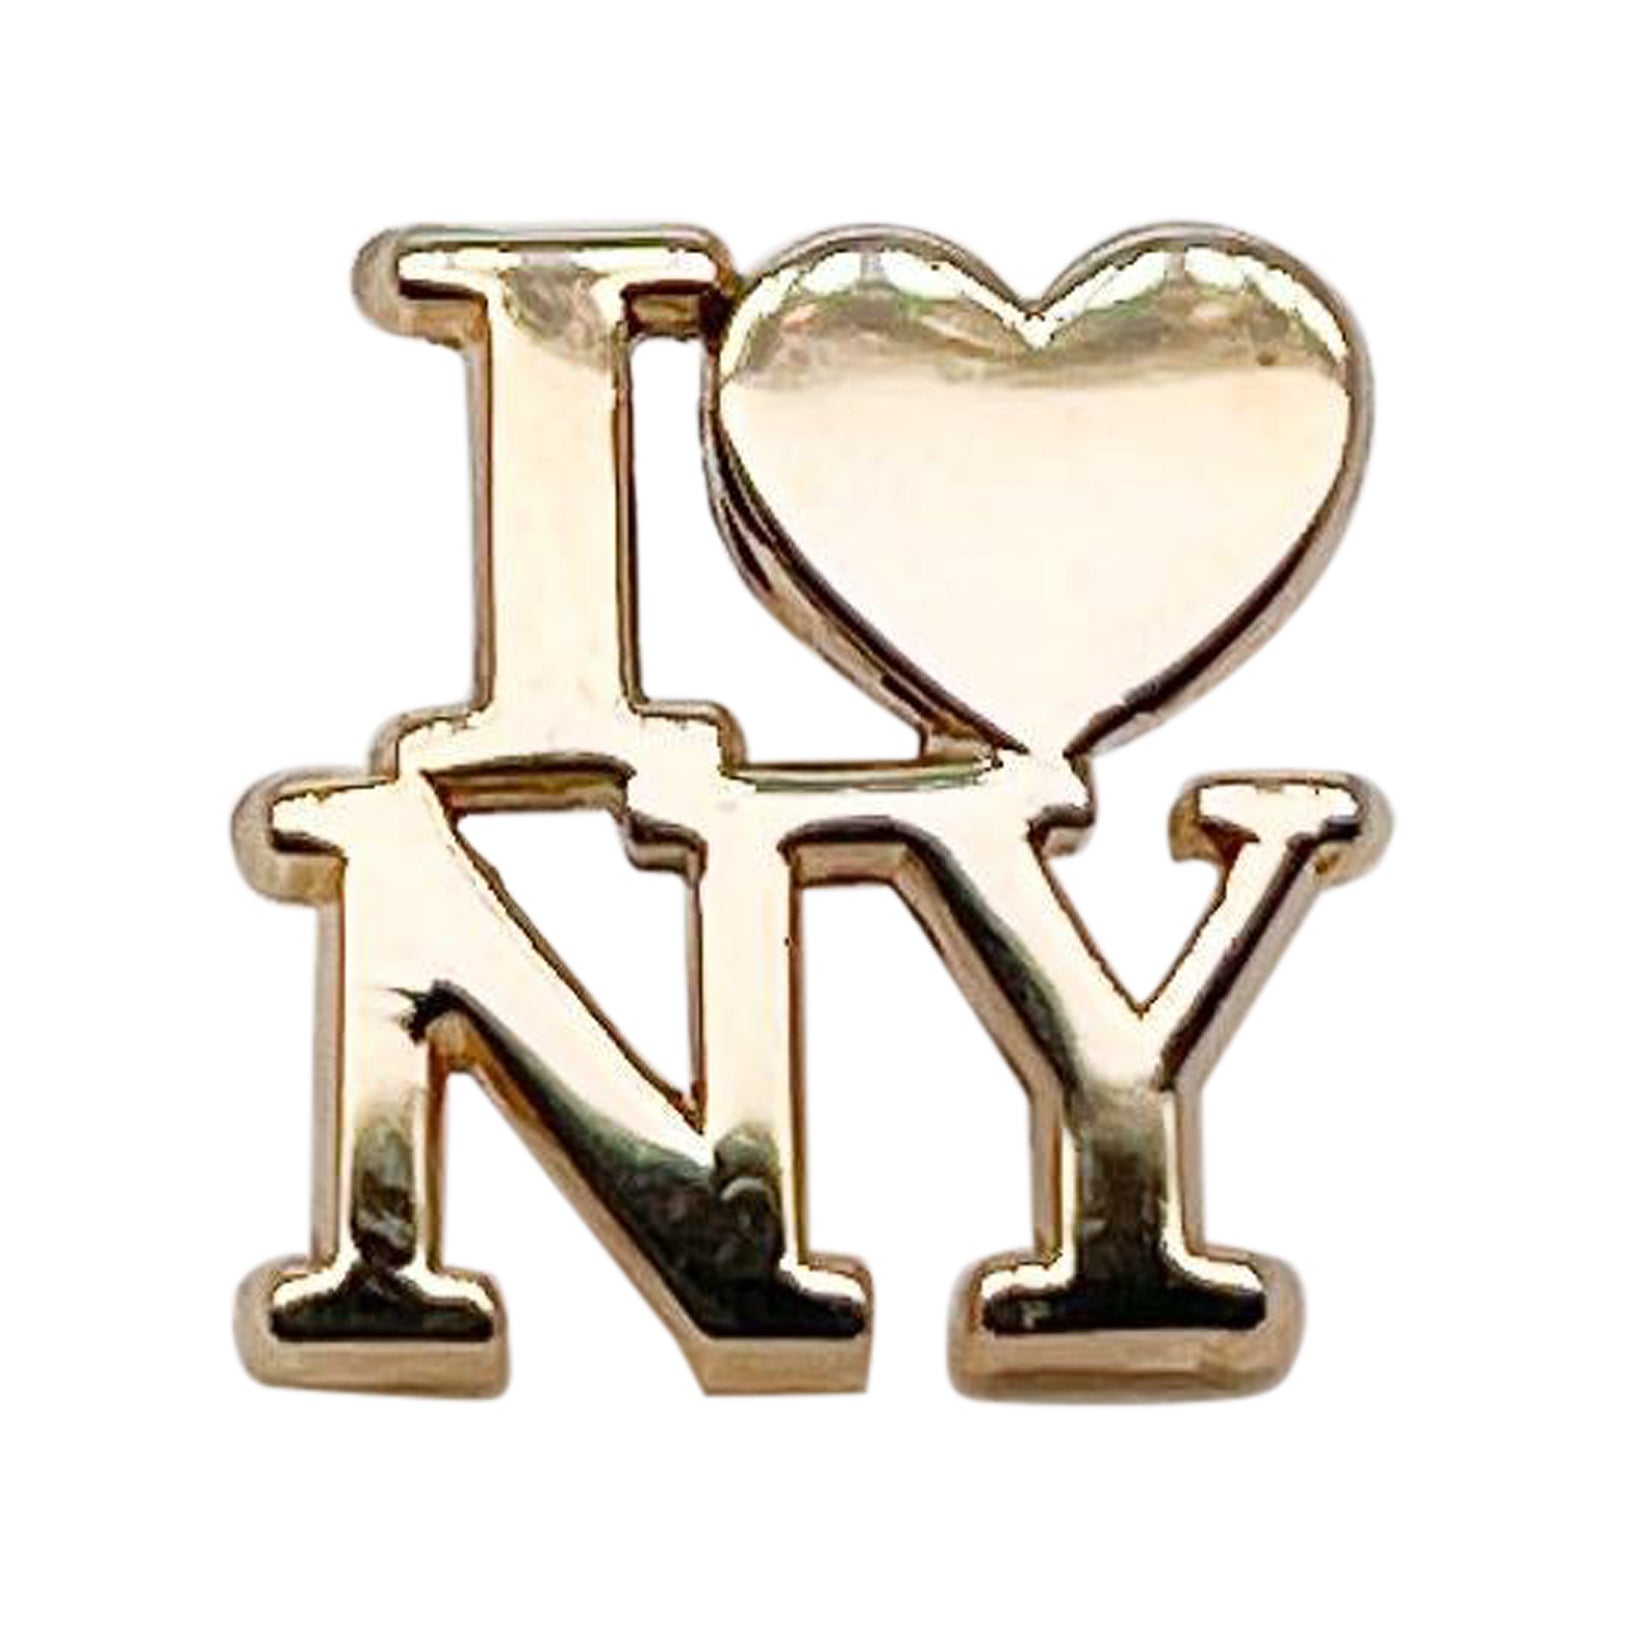 Vintage Tiffany & Co. Vermeil Sterling Silver 'I Love NY' Lapel Pin or Tie Tack